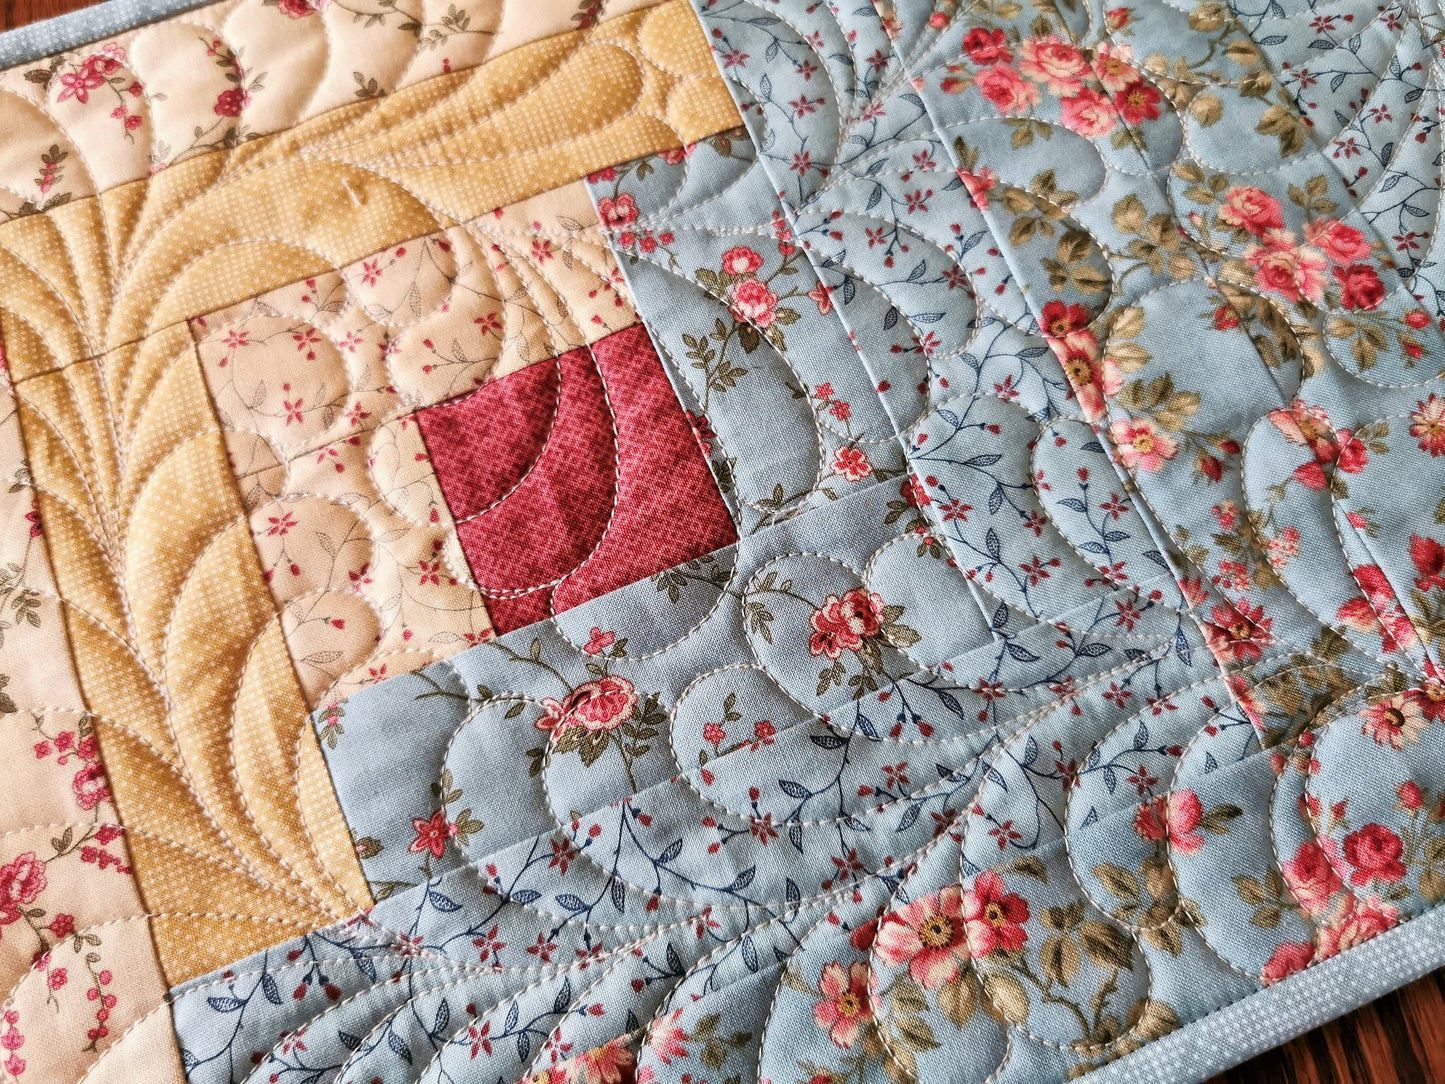 Log Cabin Quilted Table Runner in Teal and Yellow Florals